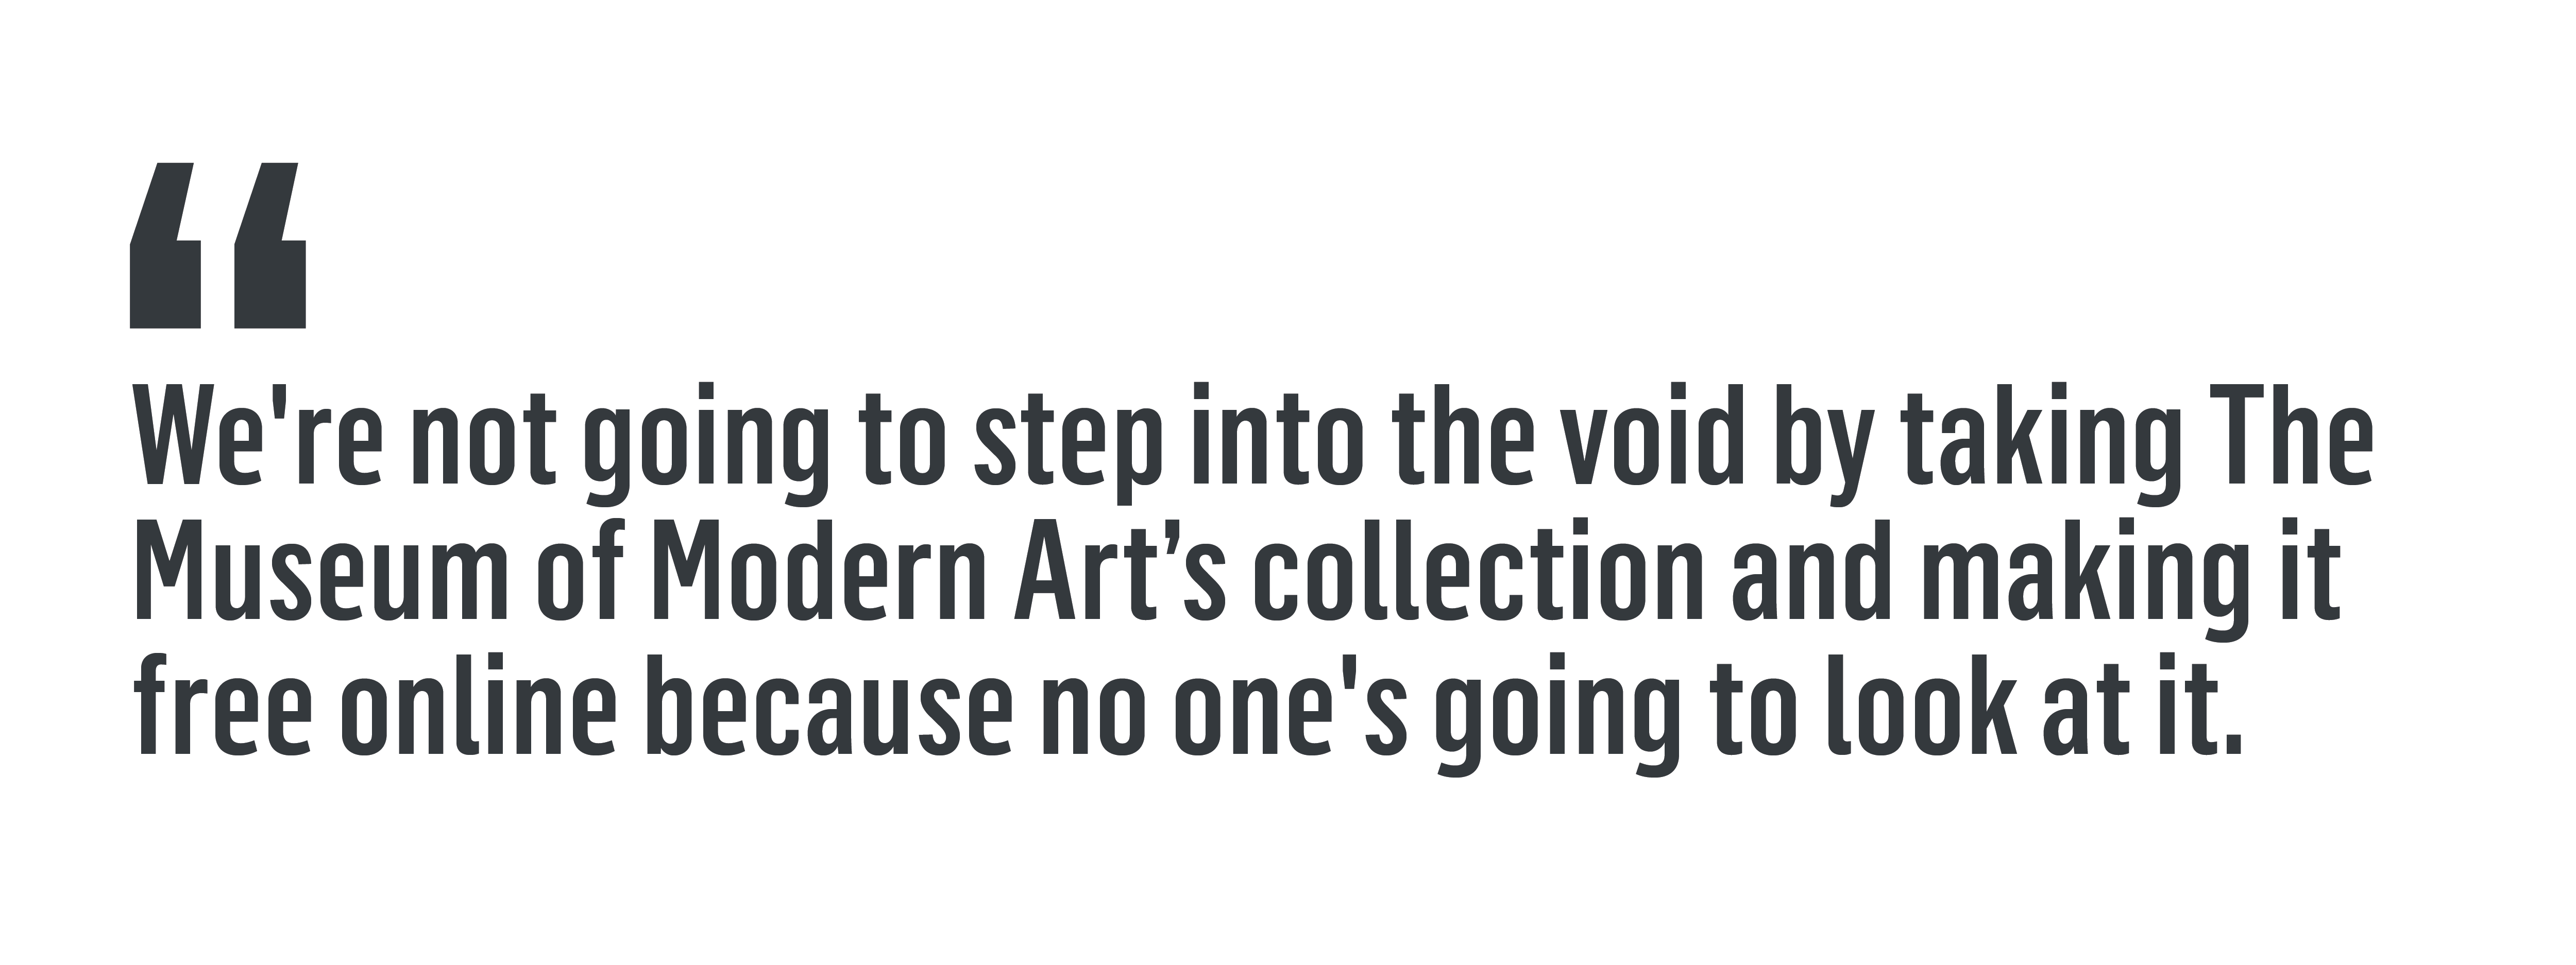 “We're not going to step into the void by taking The Museum of Modern Art’s collection and making it free online because no one's going to look at it.”